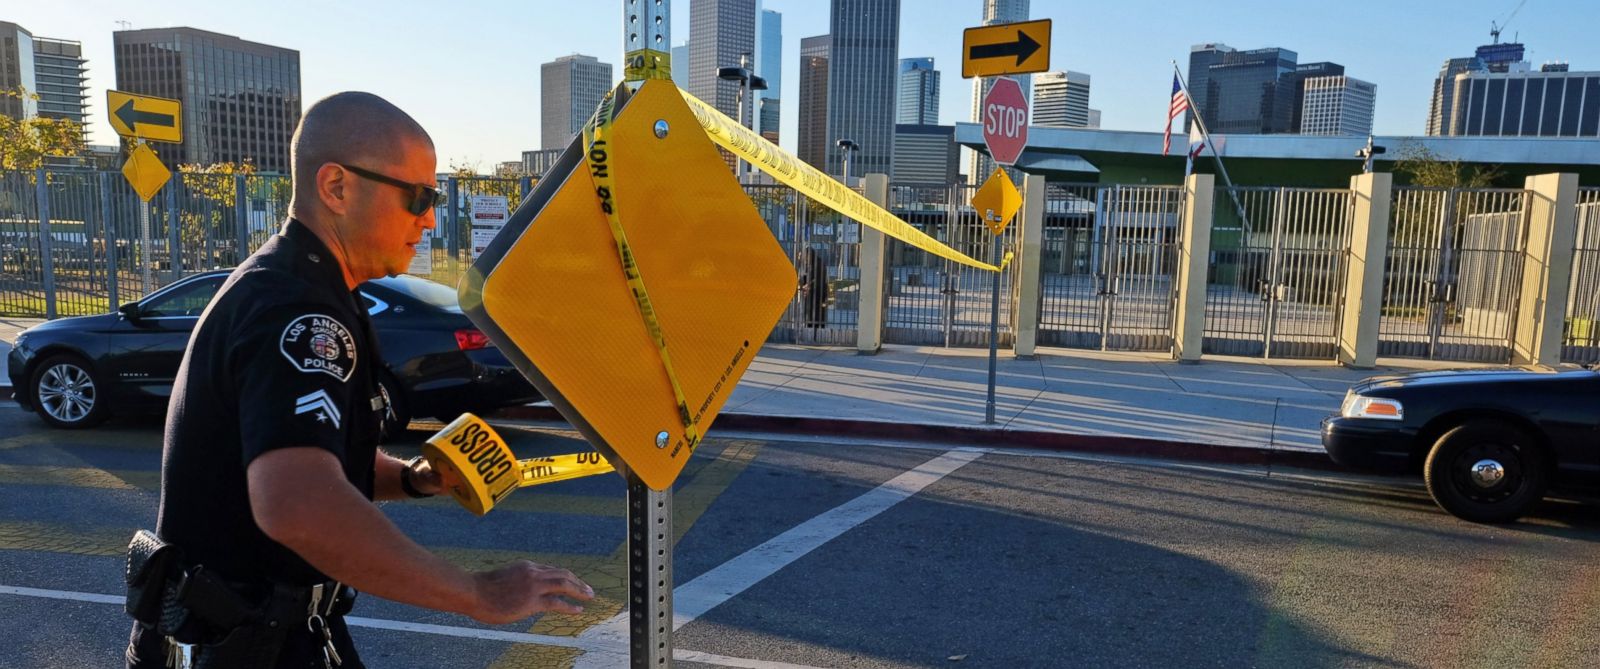 PHOTO: A police officer puts up yellow tape to close the school outside of Edward Roybal High School in Los Angeles, Dec. 15, 2015.